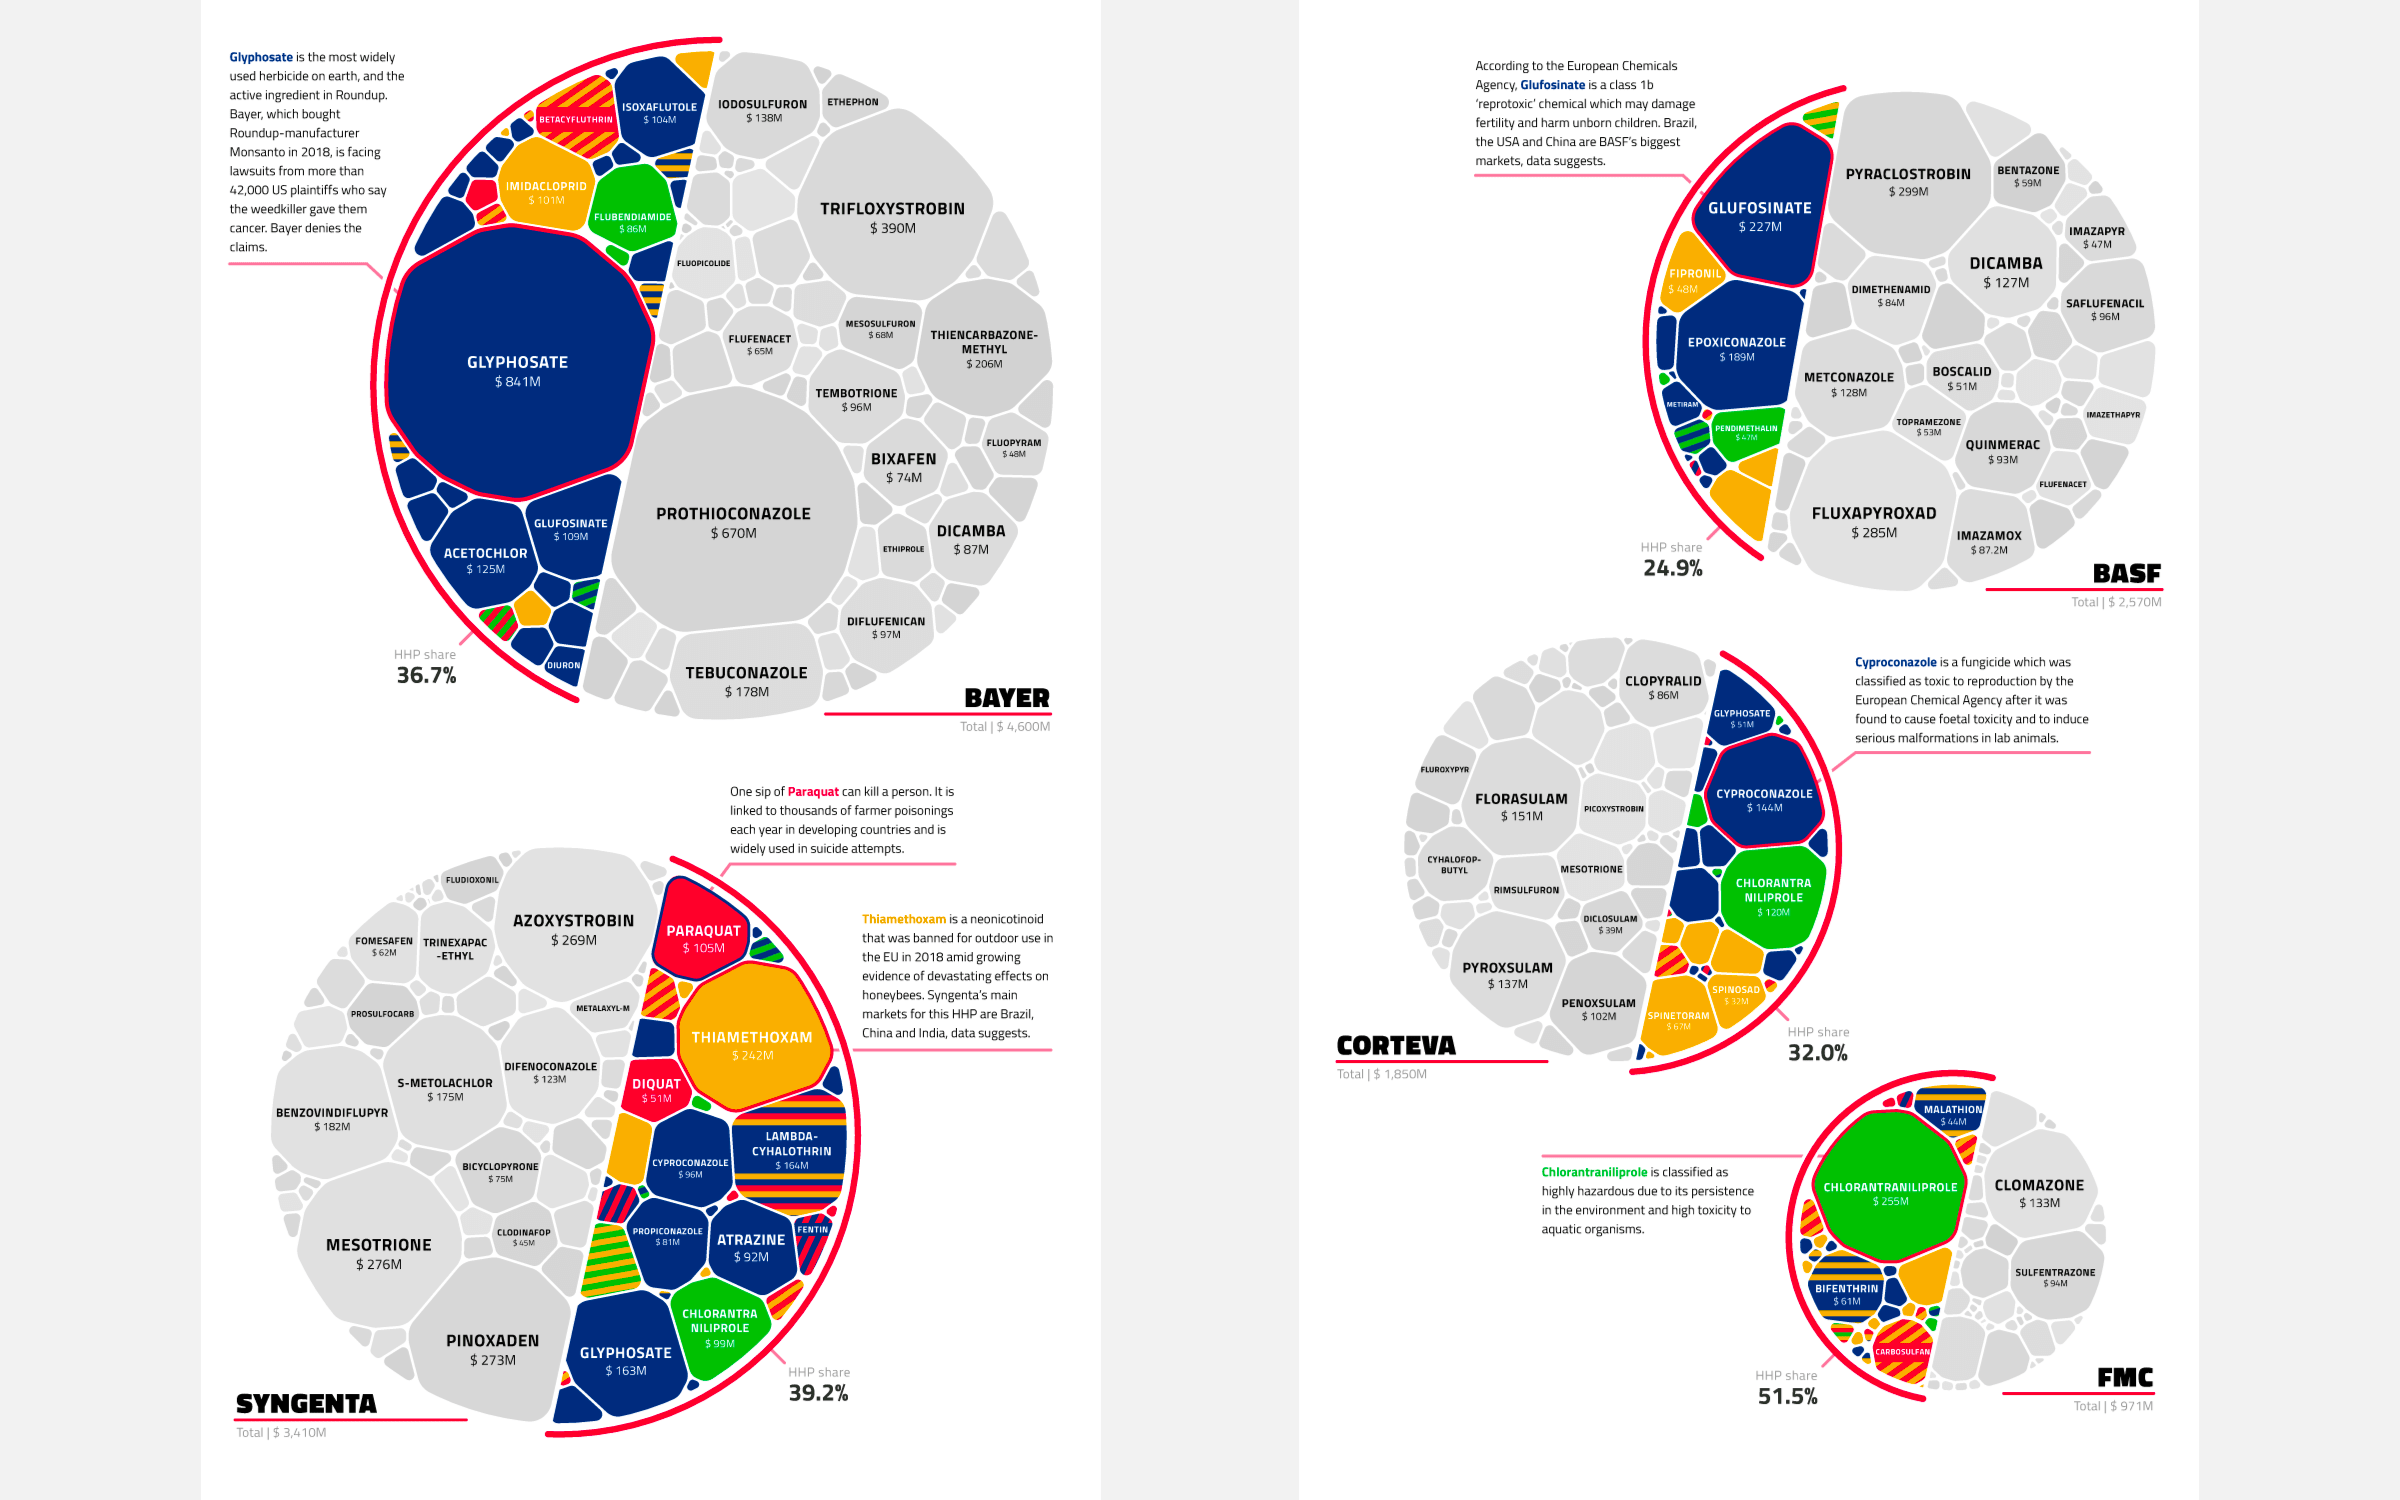 Pesticide sales of each CropLife company separately in its own circular voronoi